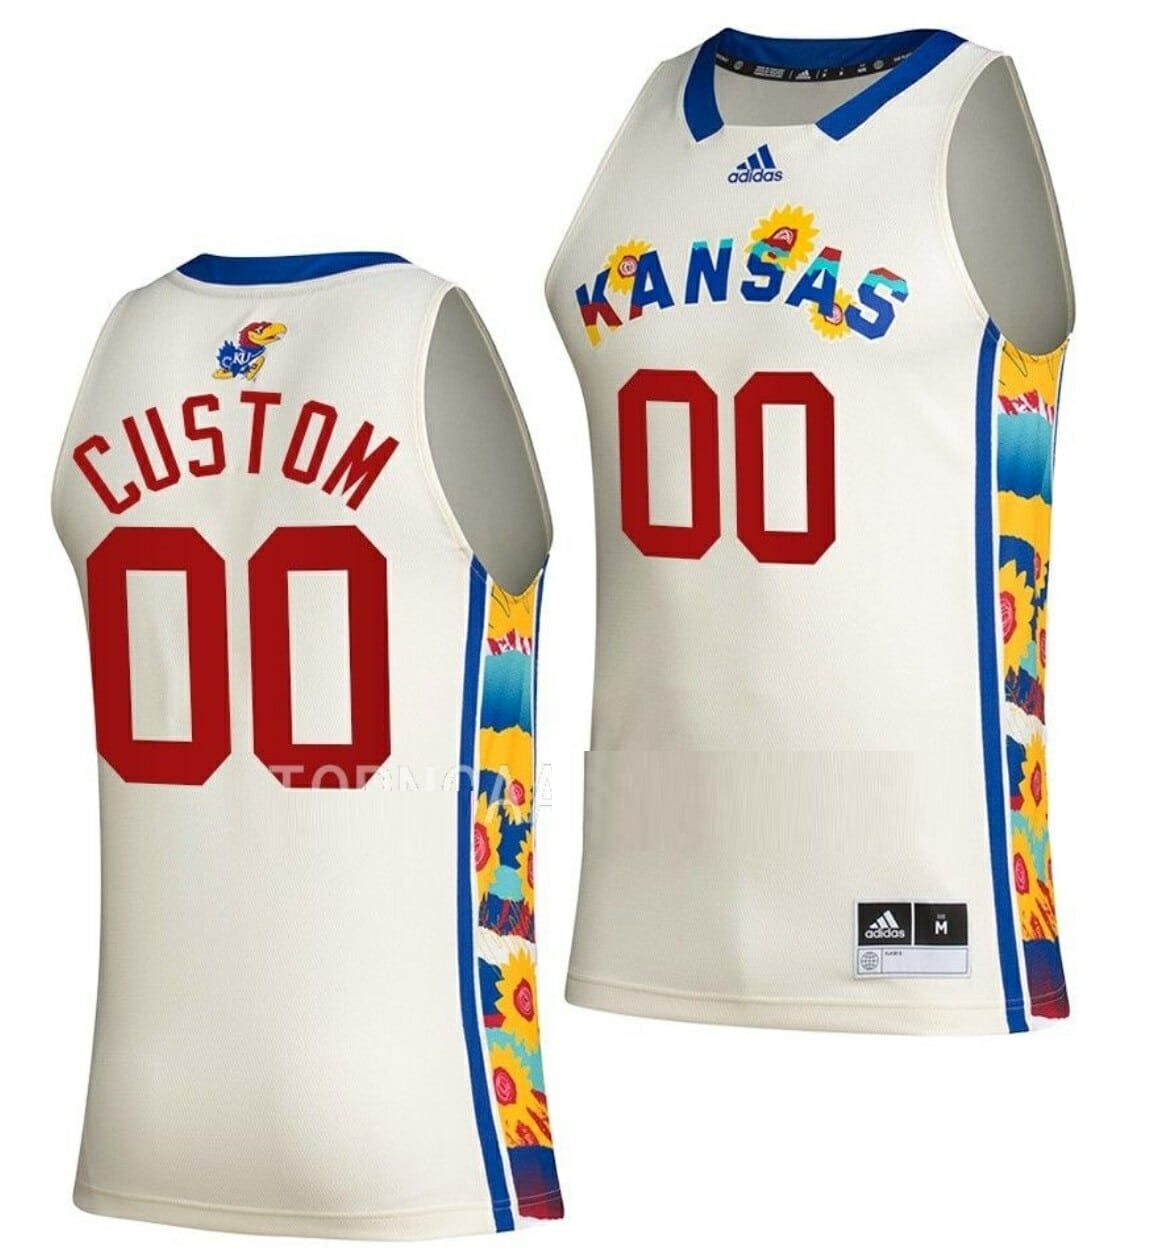 Custom New Orleans Pelicans Jerseys, Customized Pelicans Shirts